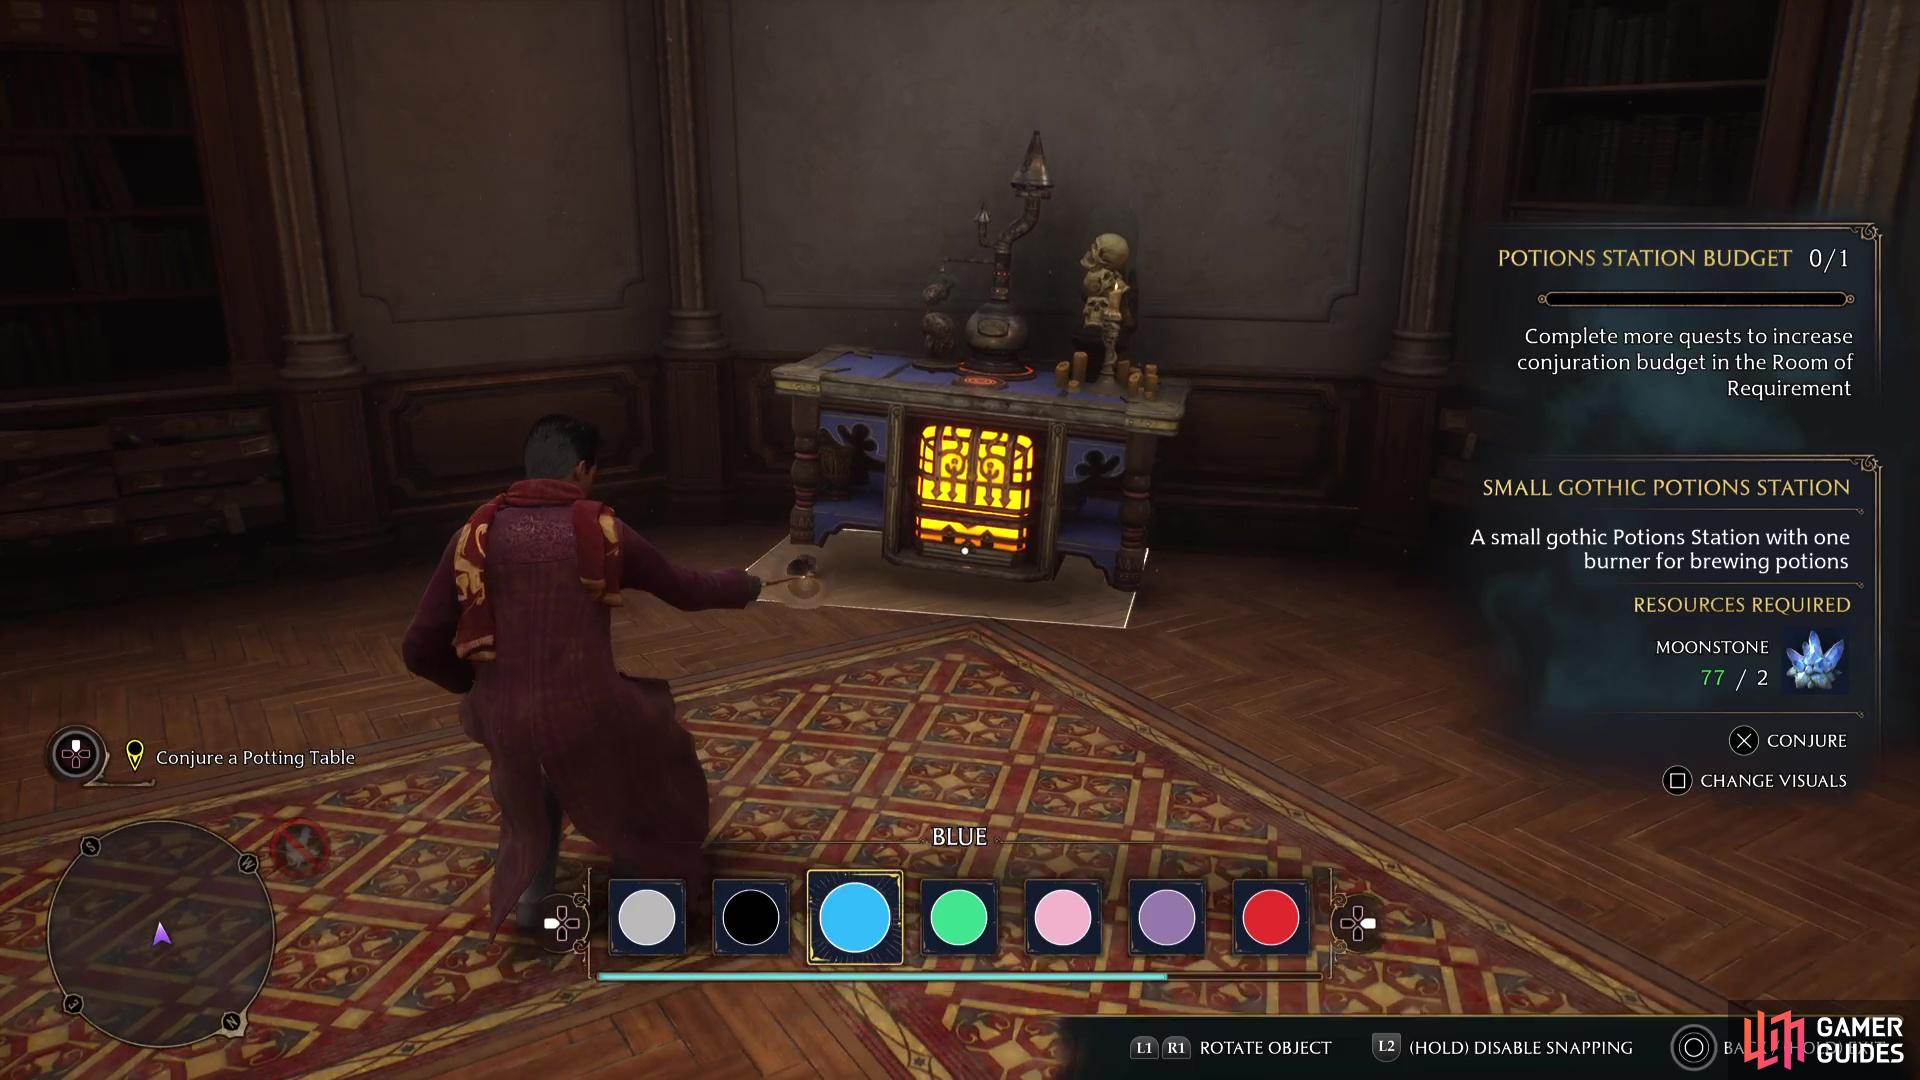 The potions table is just one of the useful features of the Room of Requirement.